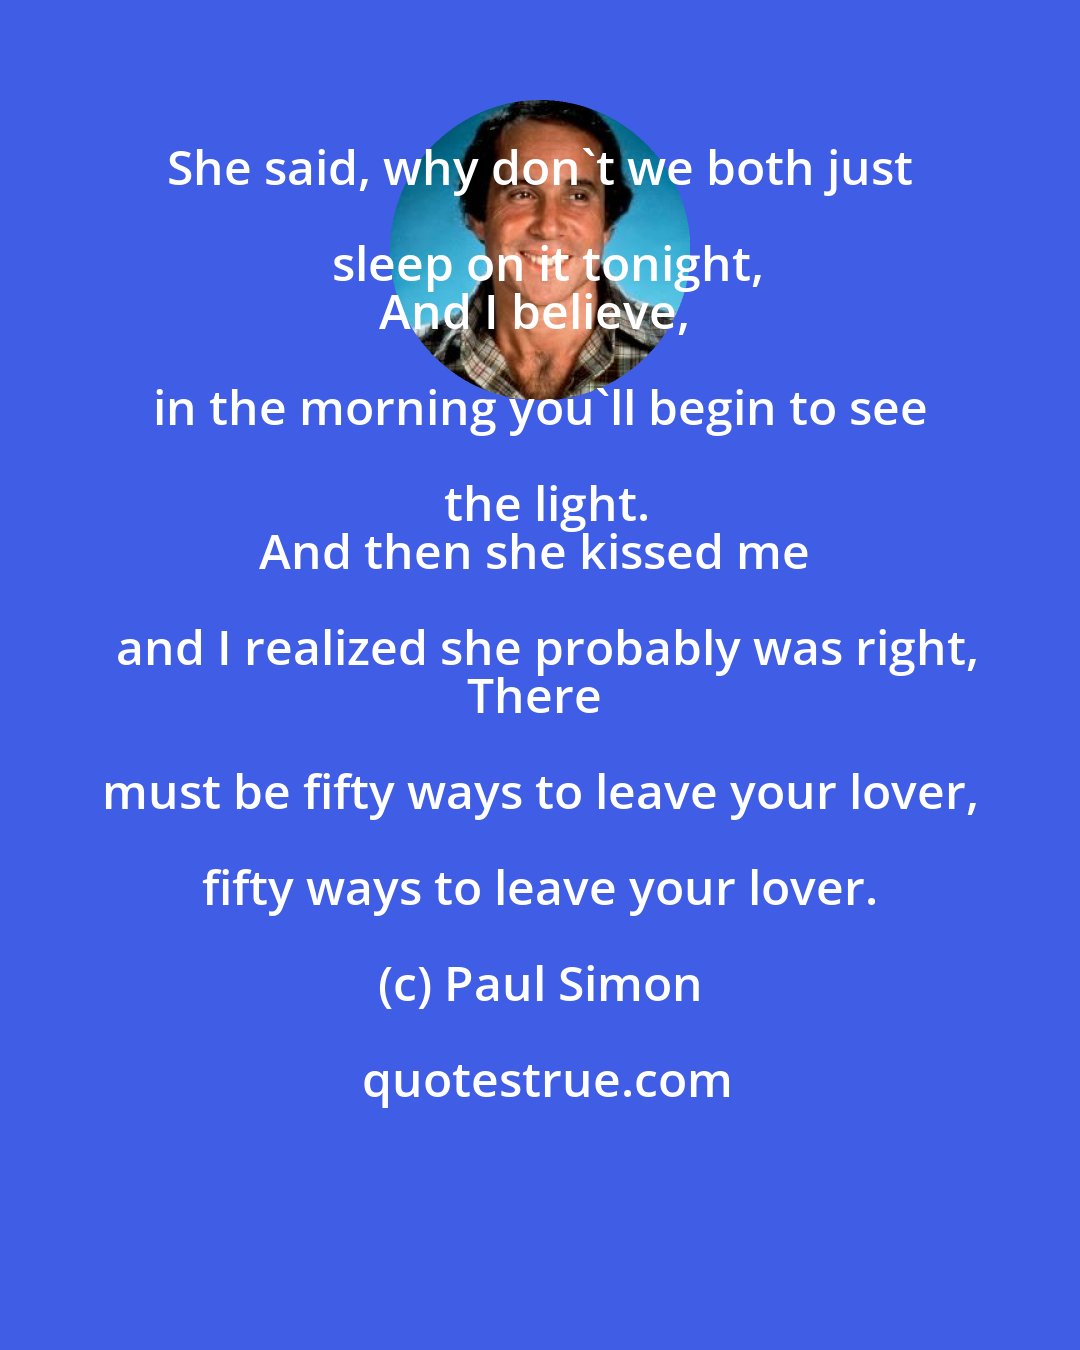 Paul Simon: She said, why don't we both just sleep on it tonight,
And I believe, in the morning you'll begin to see the light.
And then she kissed me and I realized she probably was right,
There must be fifty ways to leave your lover, fifty ways to leave your lover.